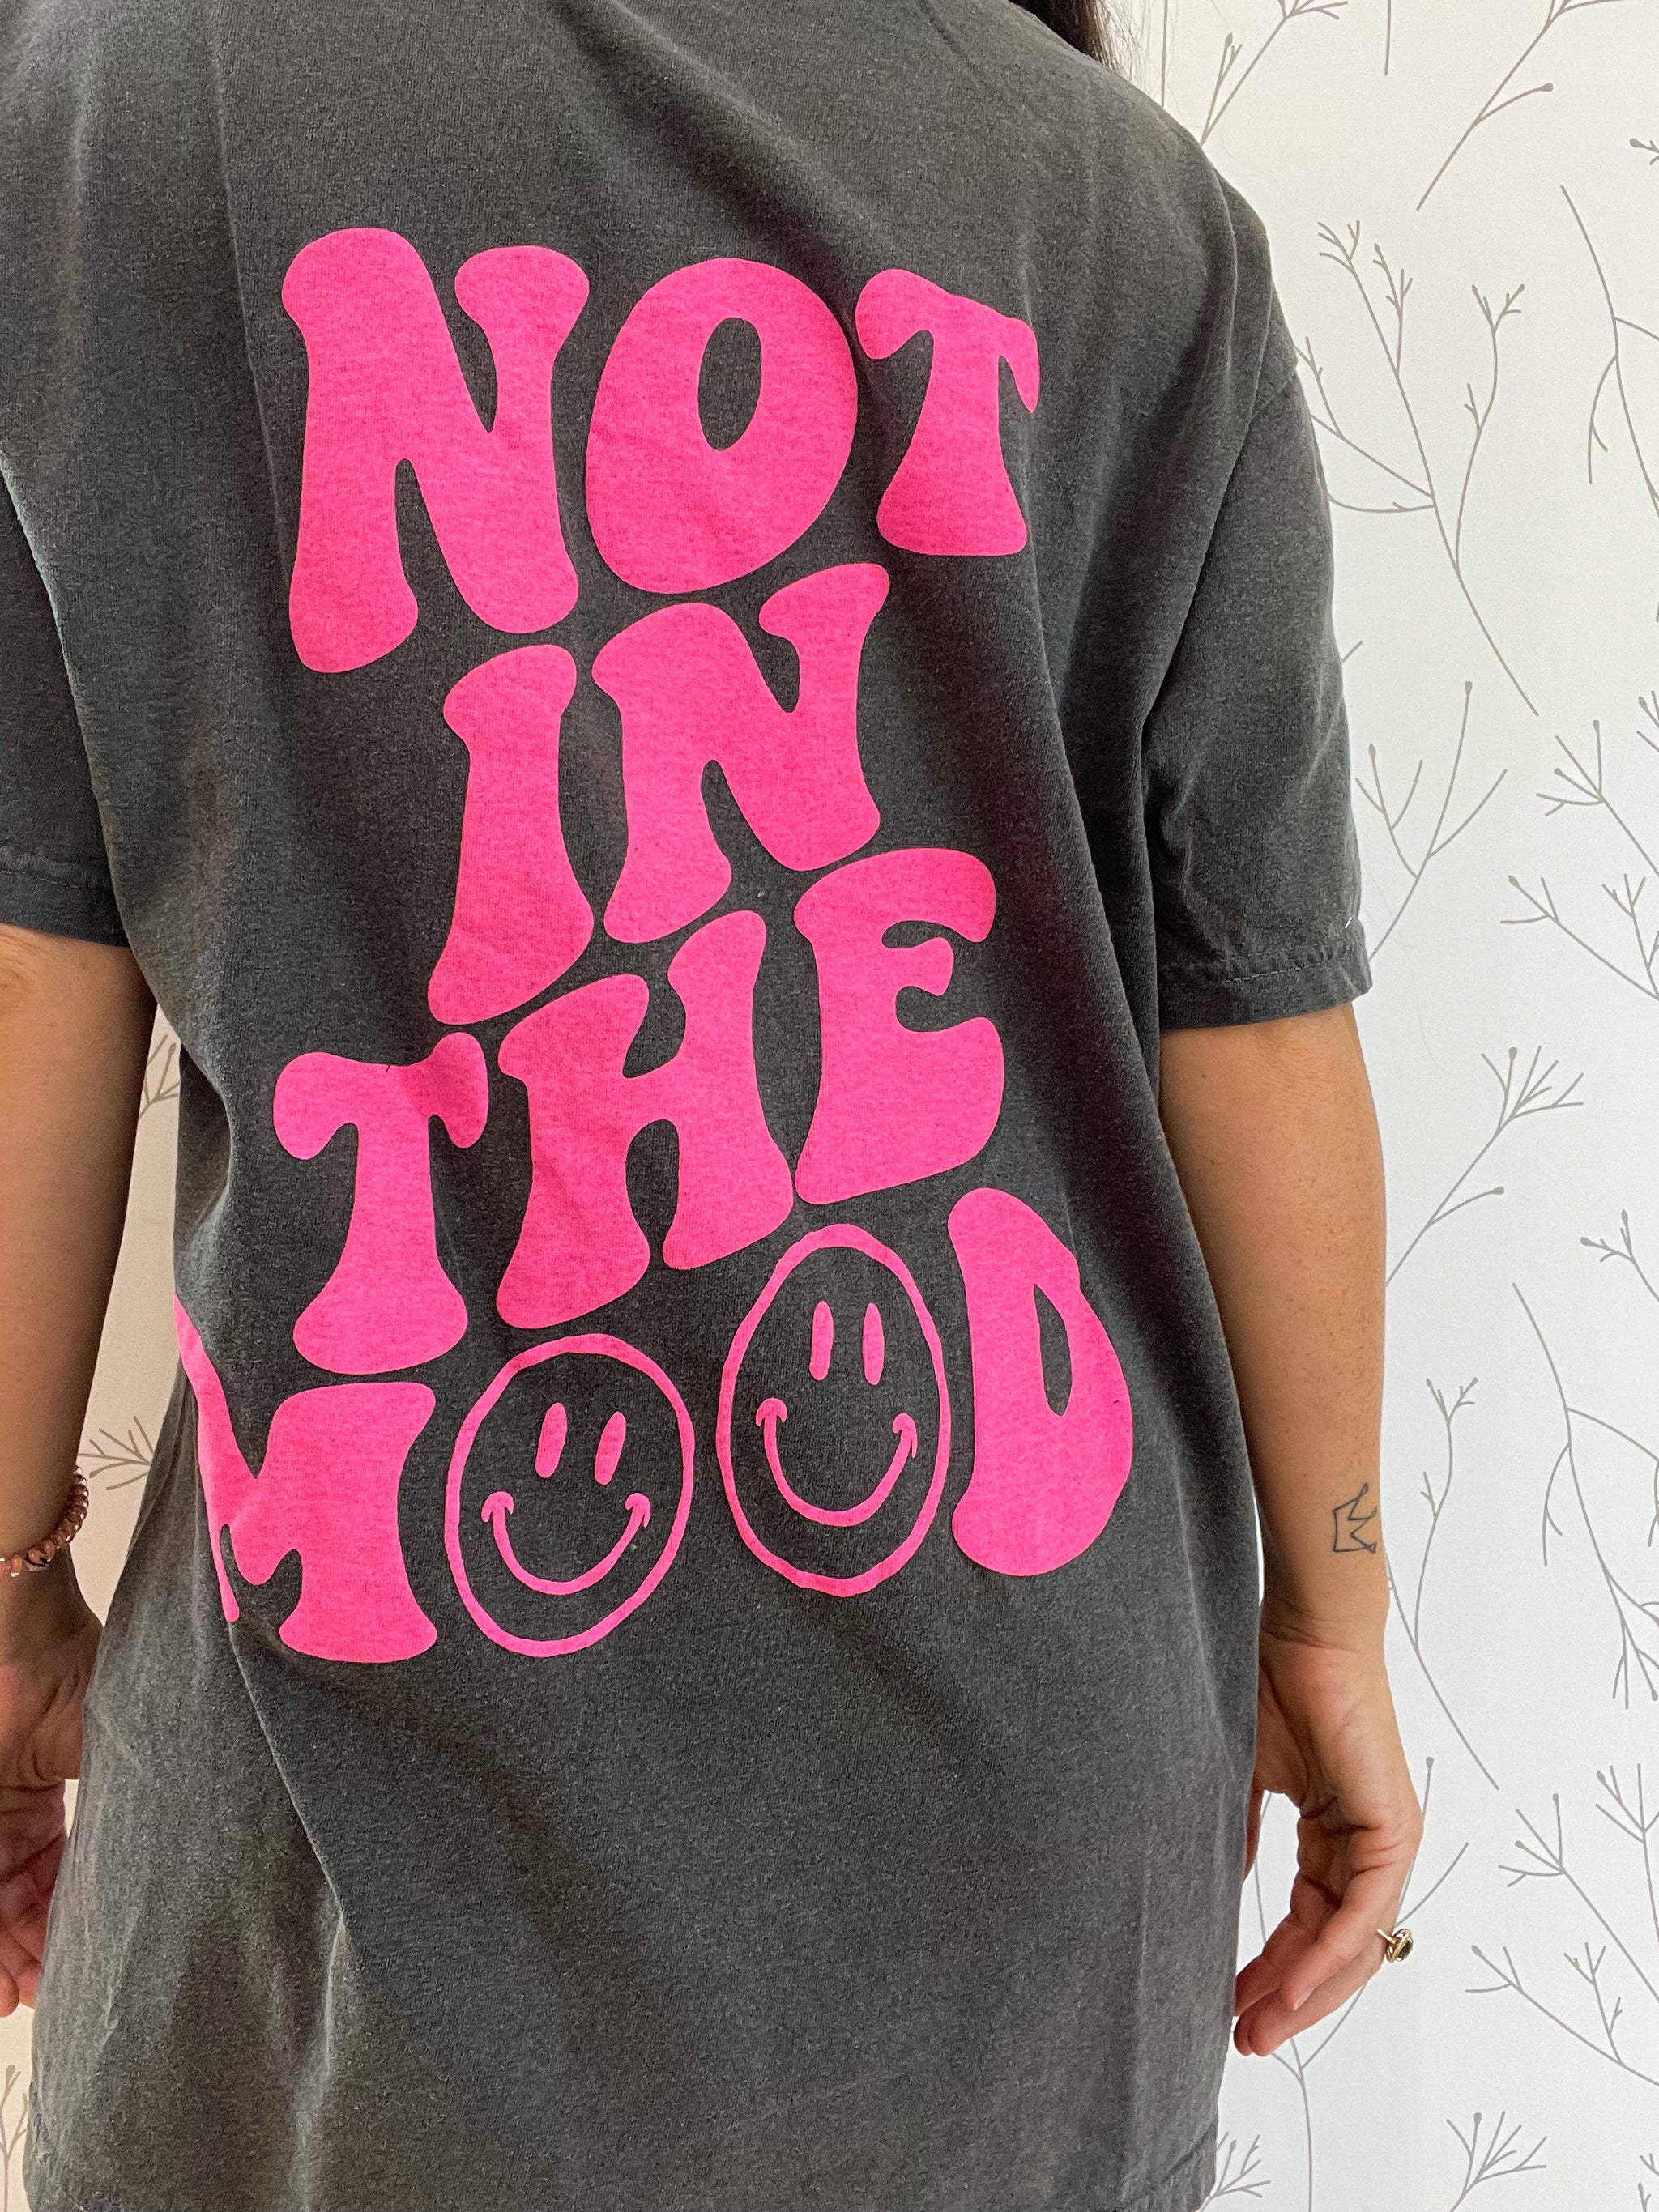 "Not In The Mood" Graphic Tee